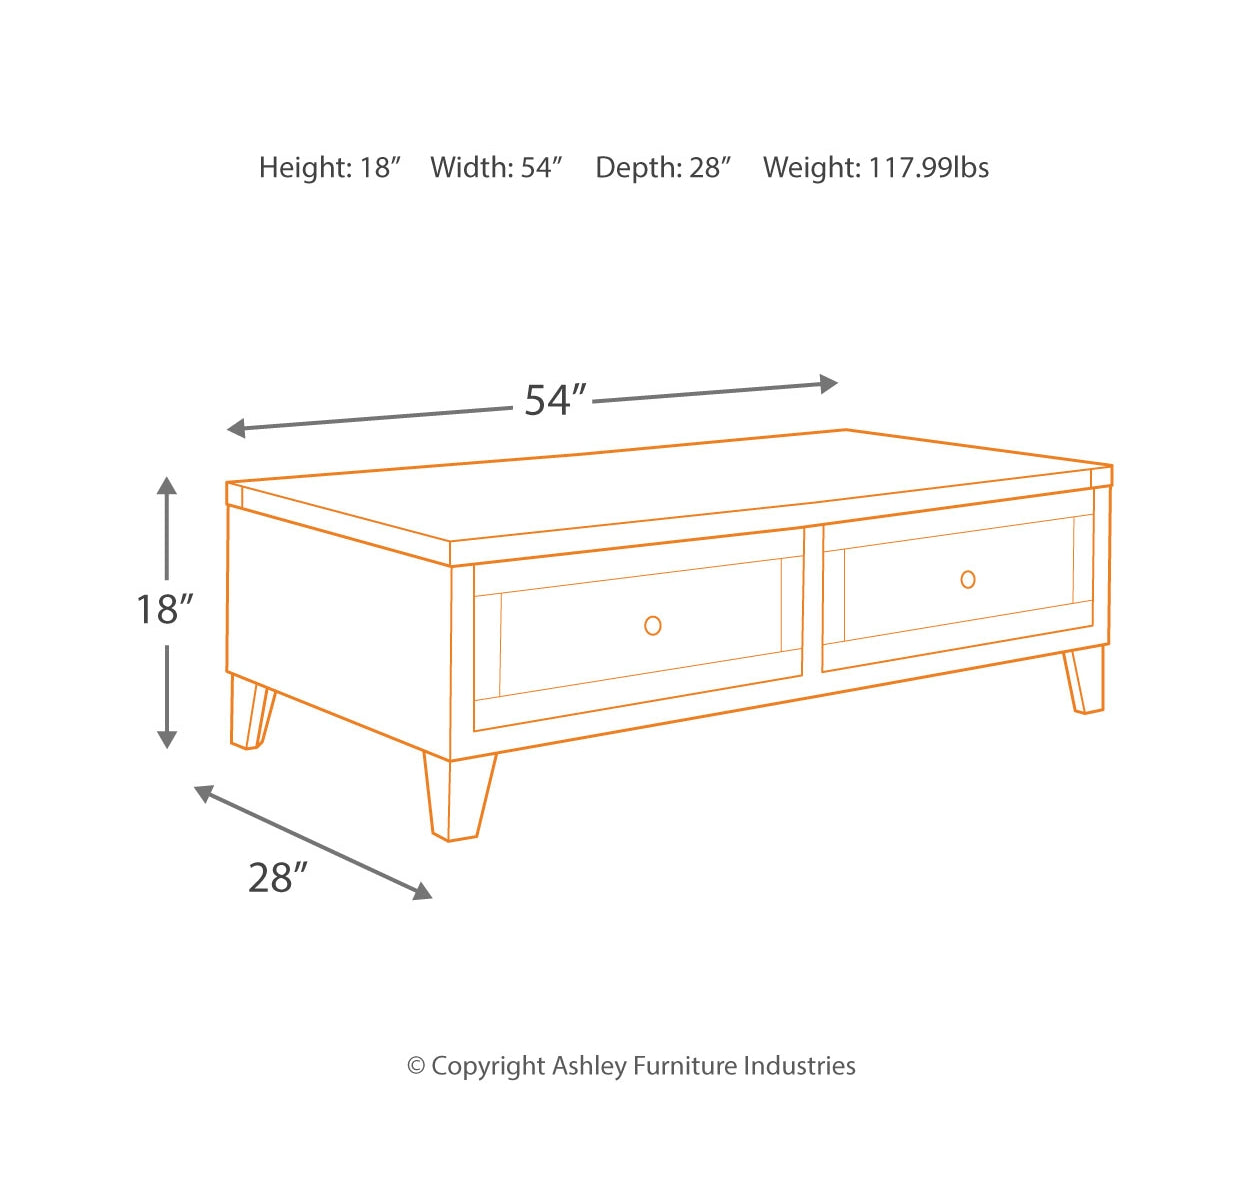 Chazney Coffee Table with Lift Top